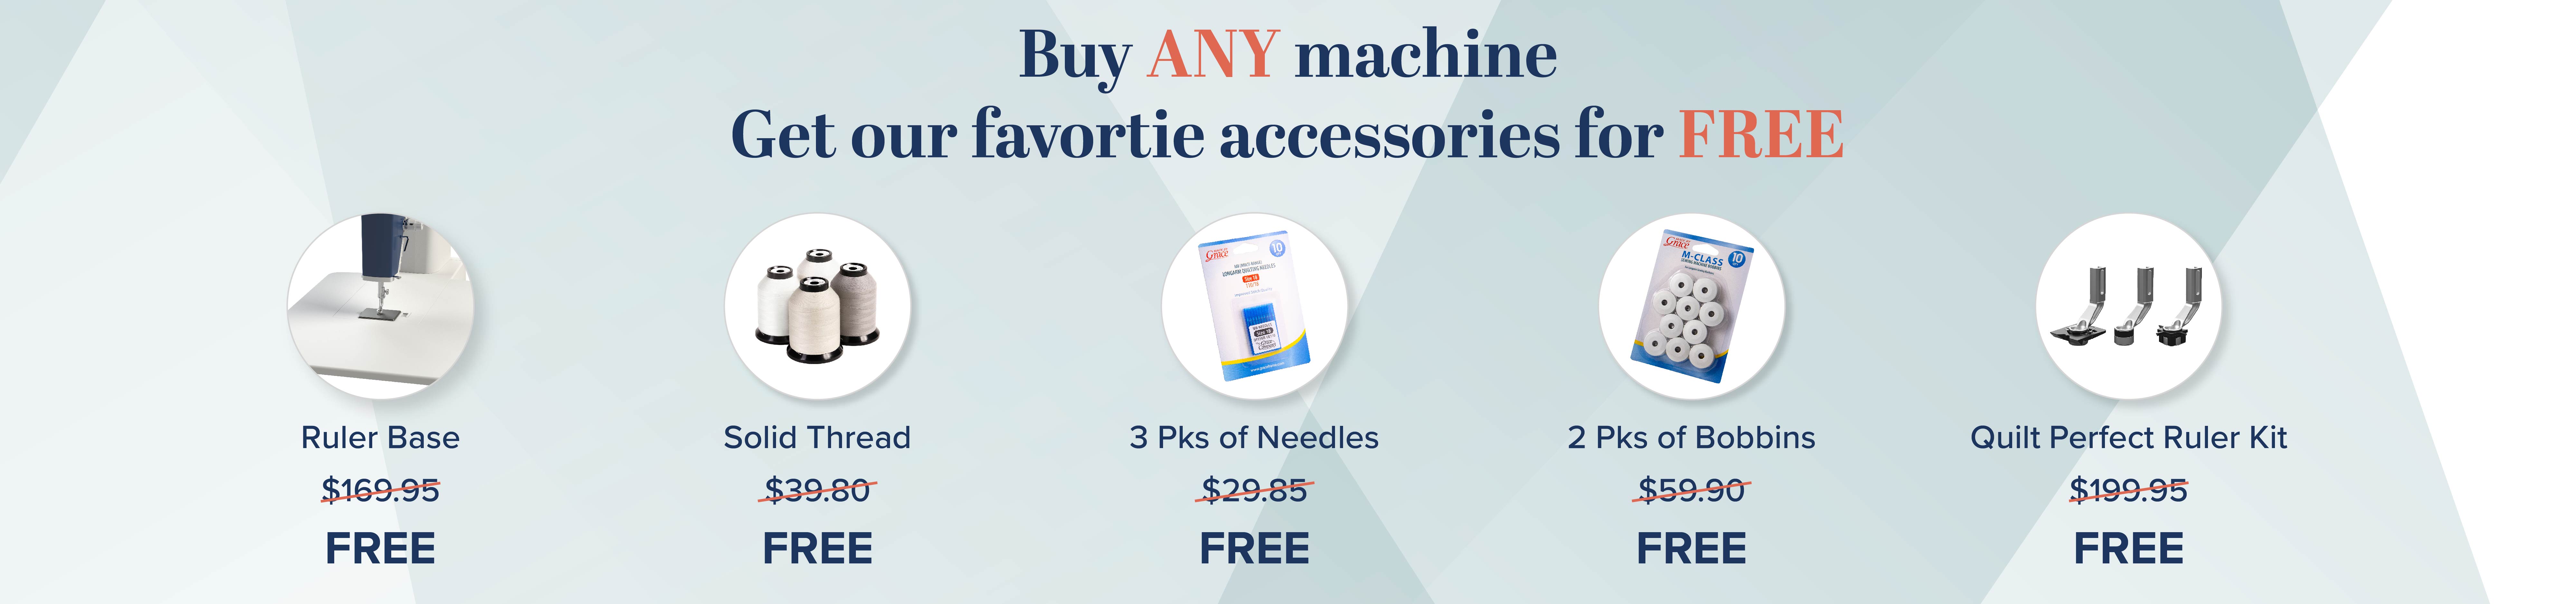 Buy any machine and get our favorite accessories for free